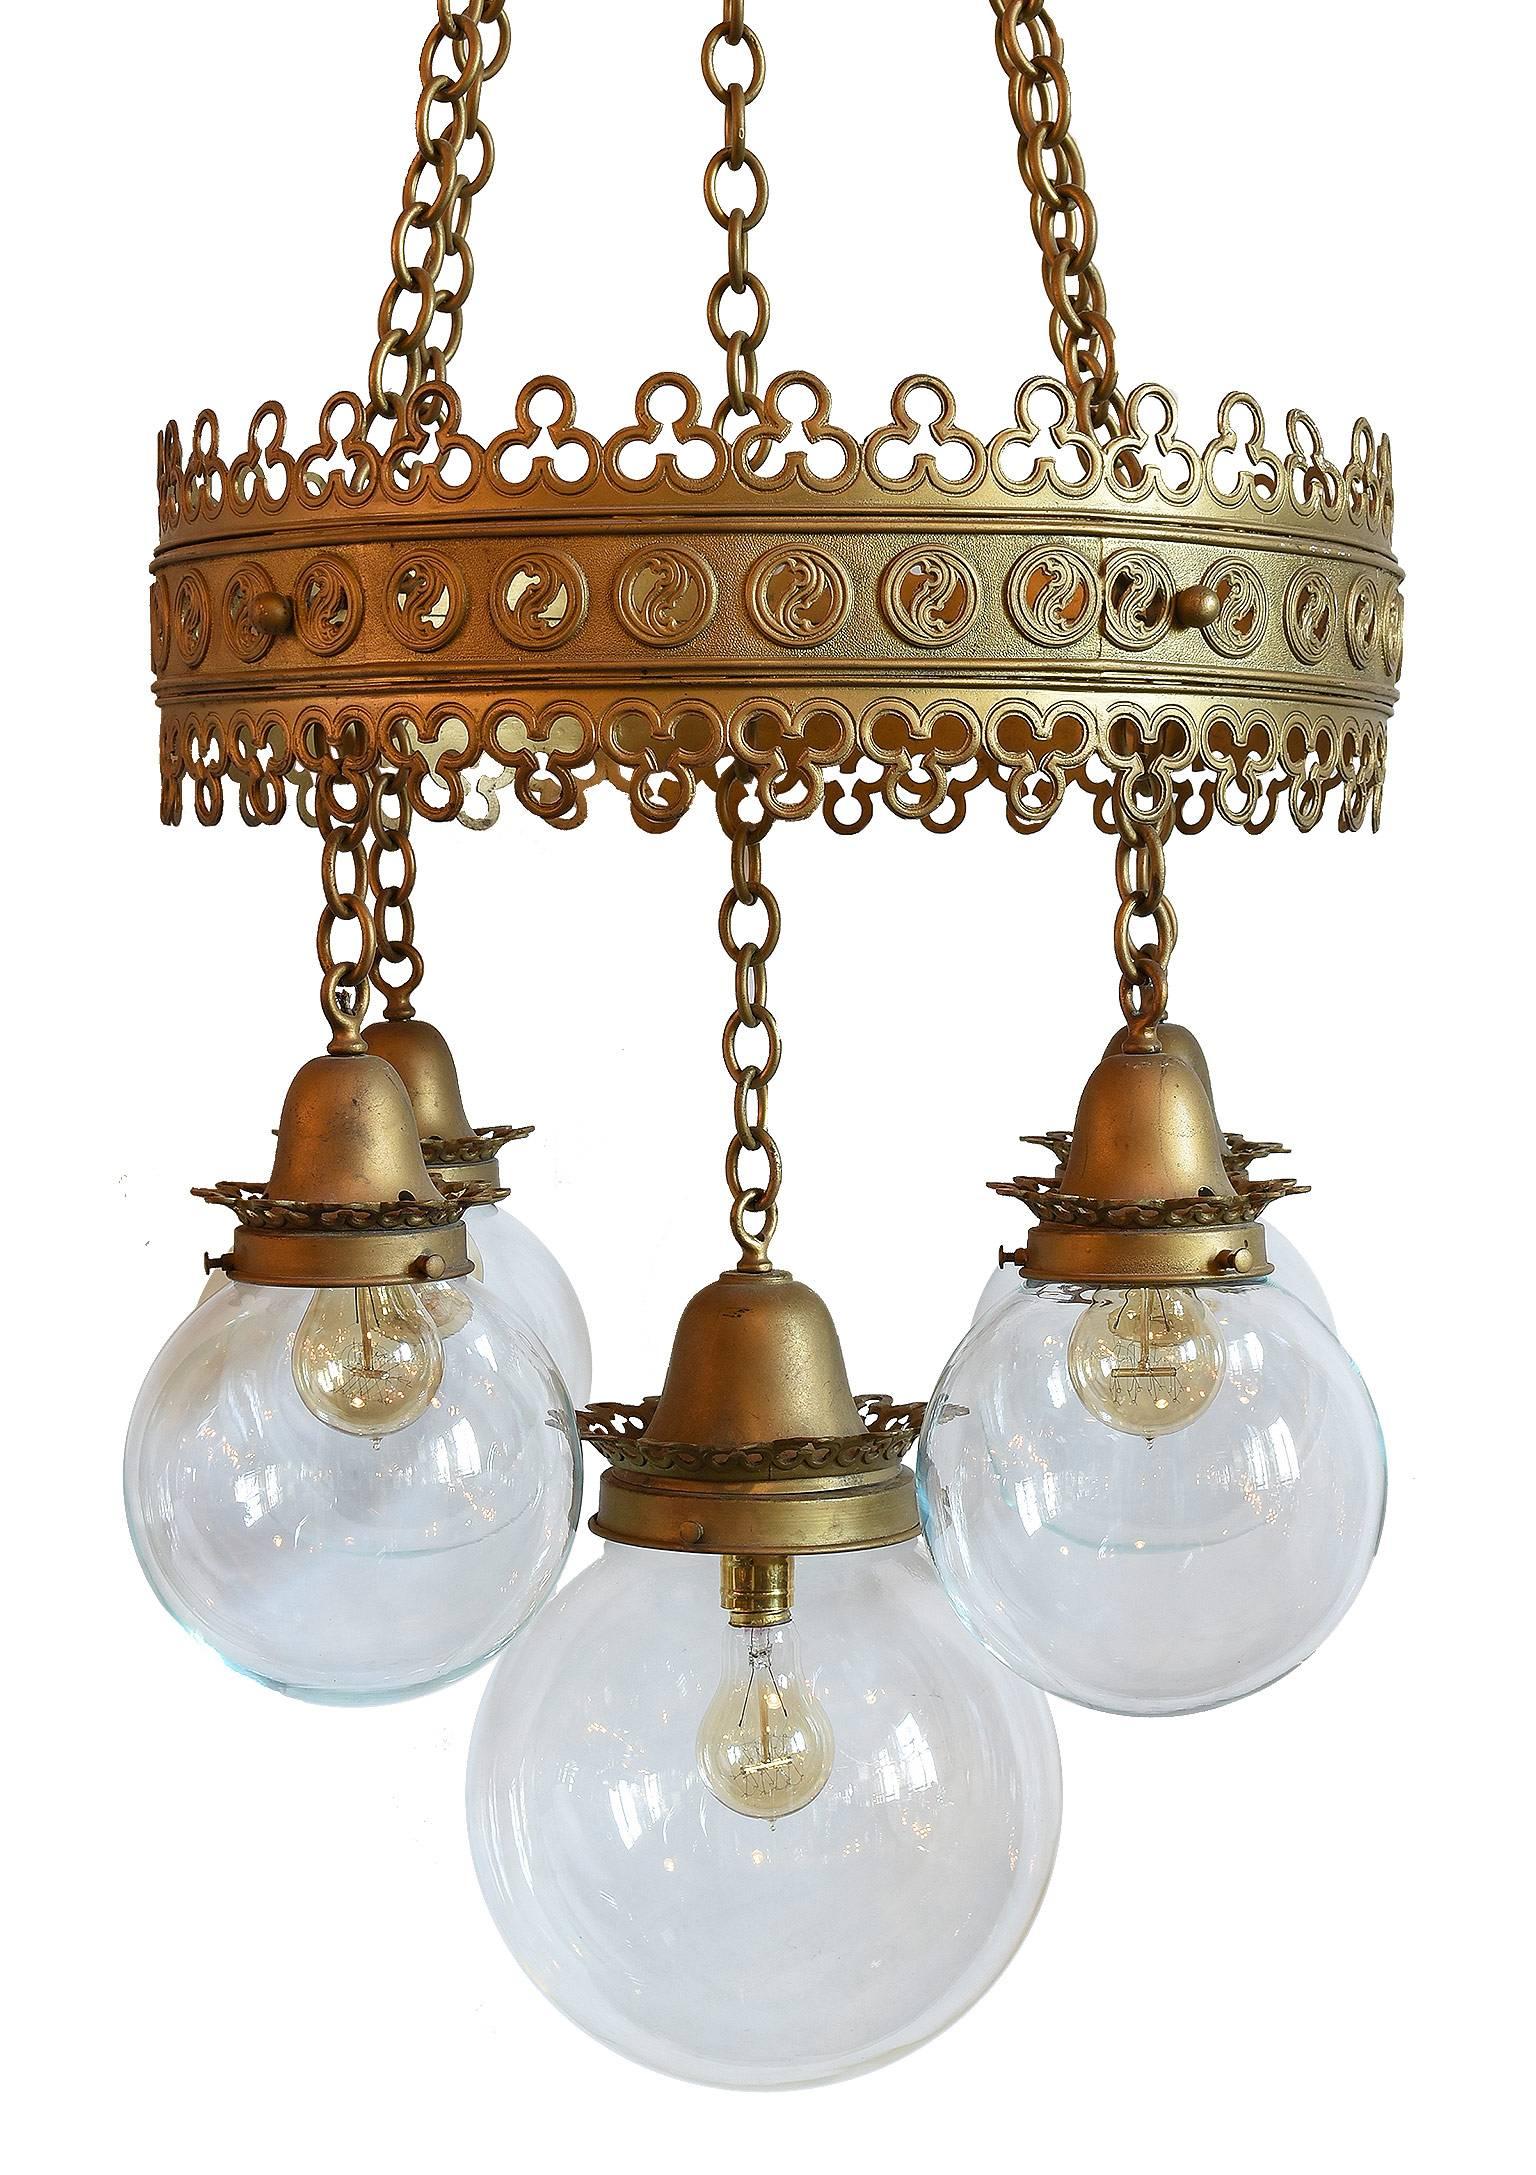 This beautiful brass chandelier made circa 1905 features trefoils and other Gothic detailing along with its wonderful original glass and canopies. Great construction and design and matching pair available. 

We find that early antique lighting was